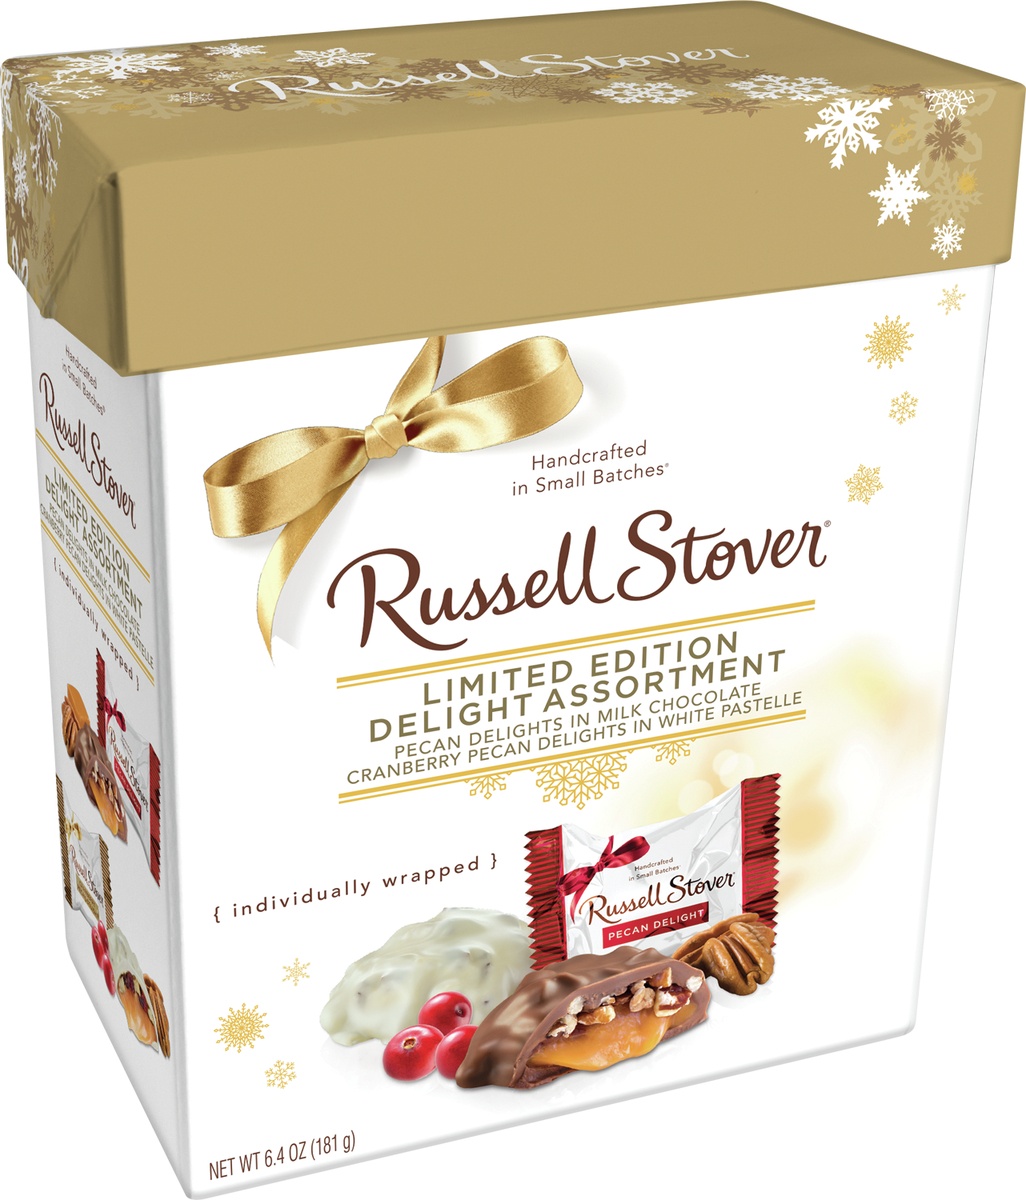 slide 1 of 1, Russell Stover Limited Edition Delight Assortment, 6.4 oz